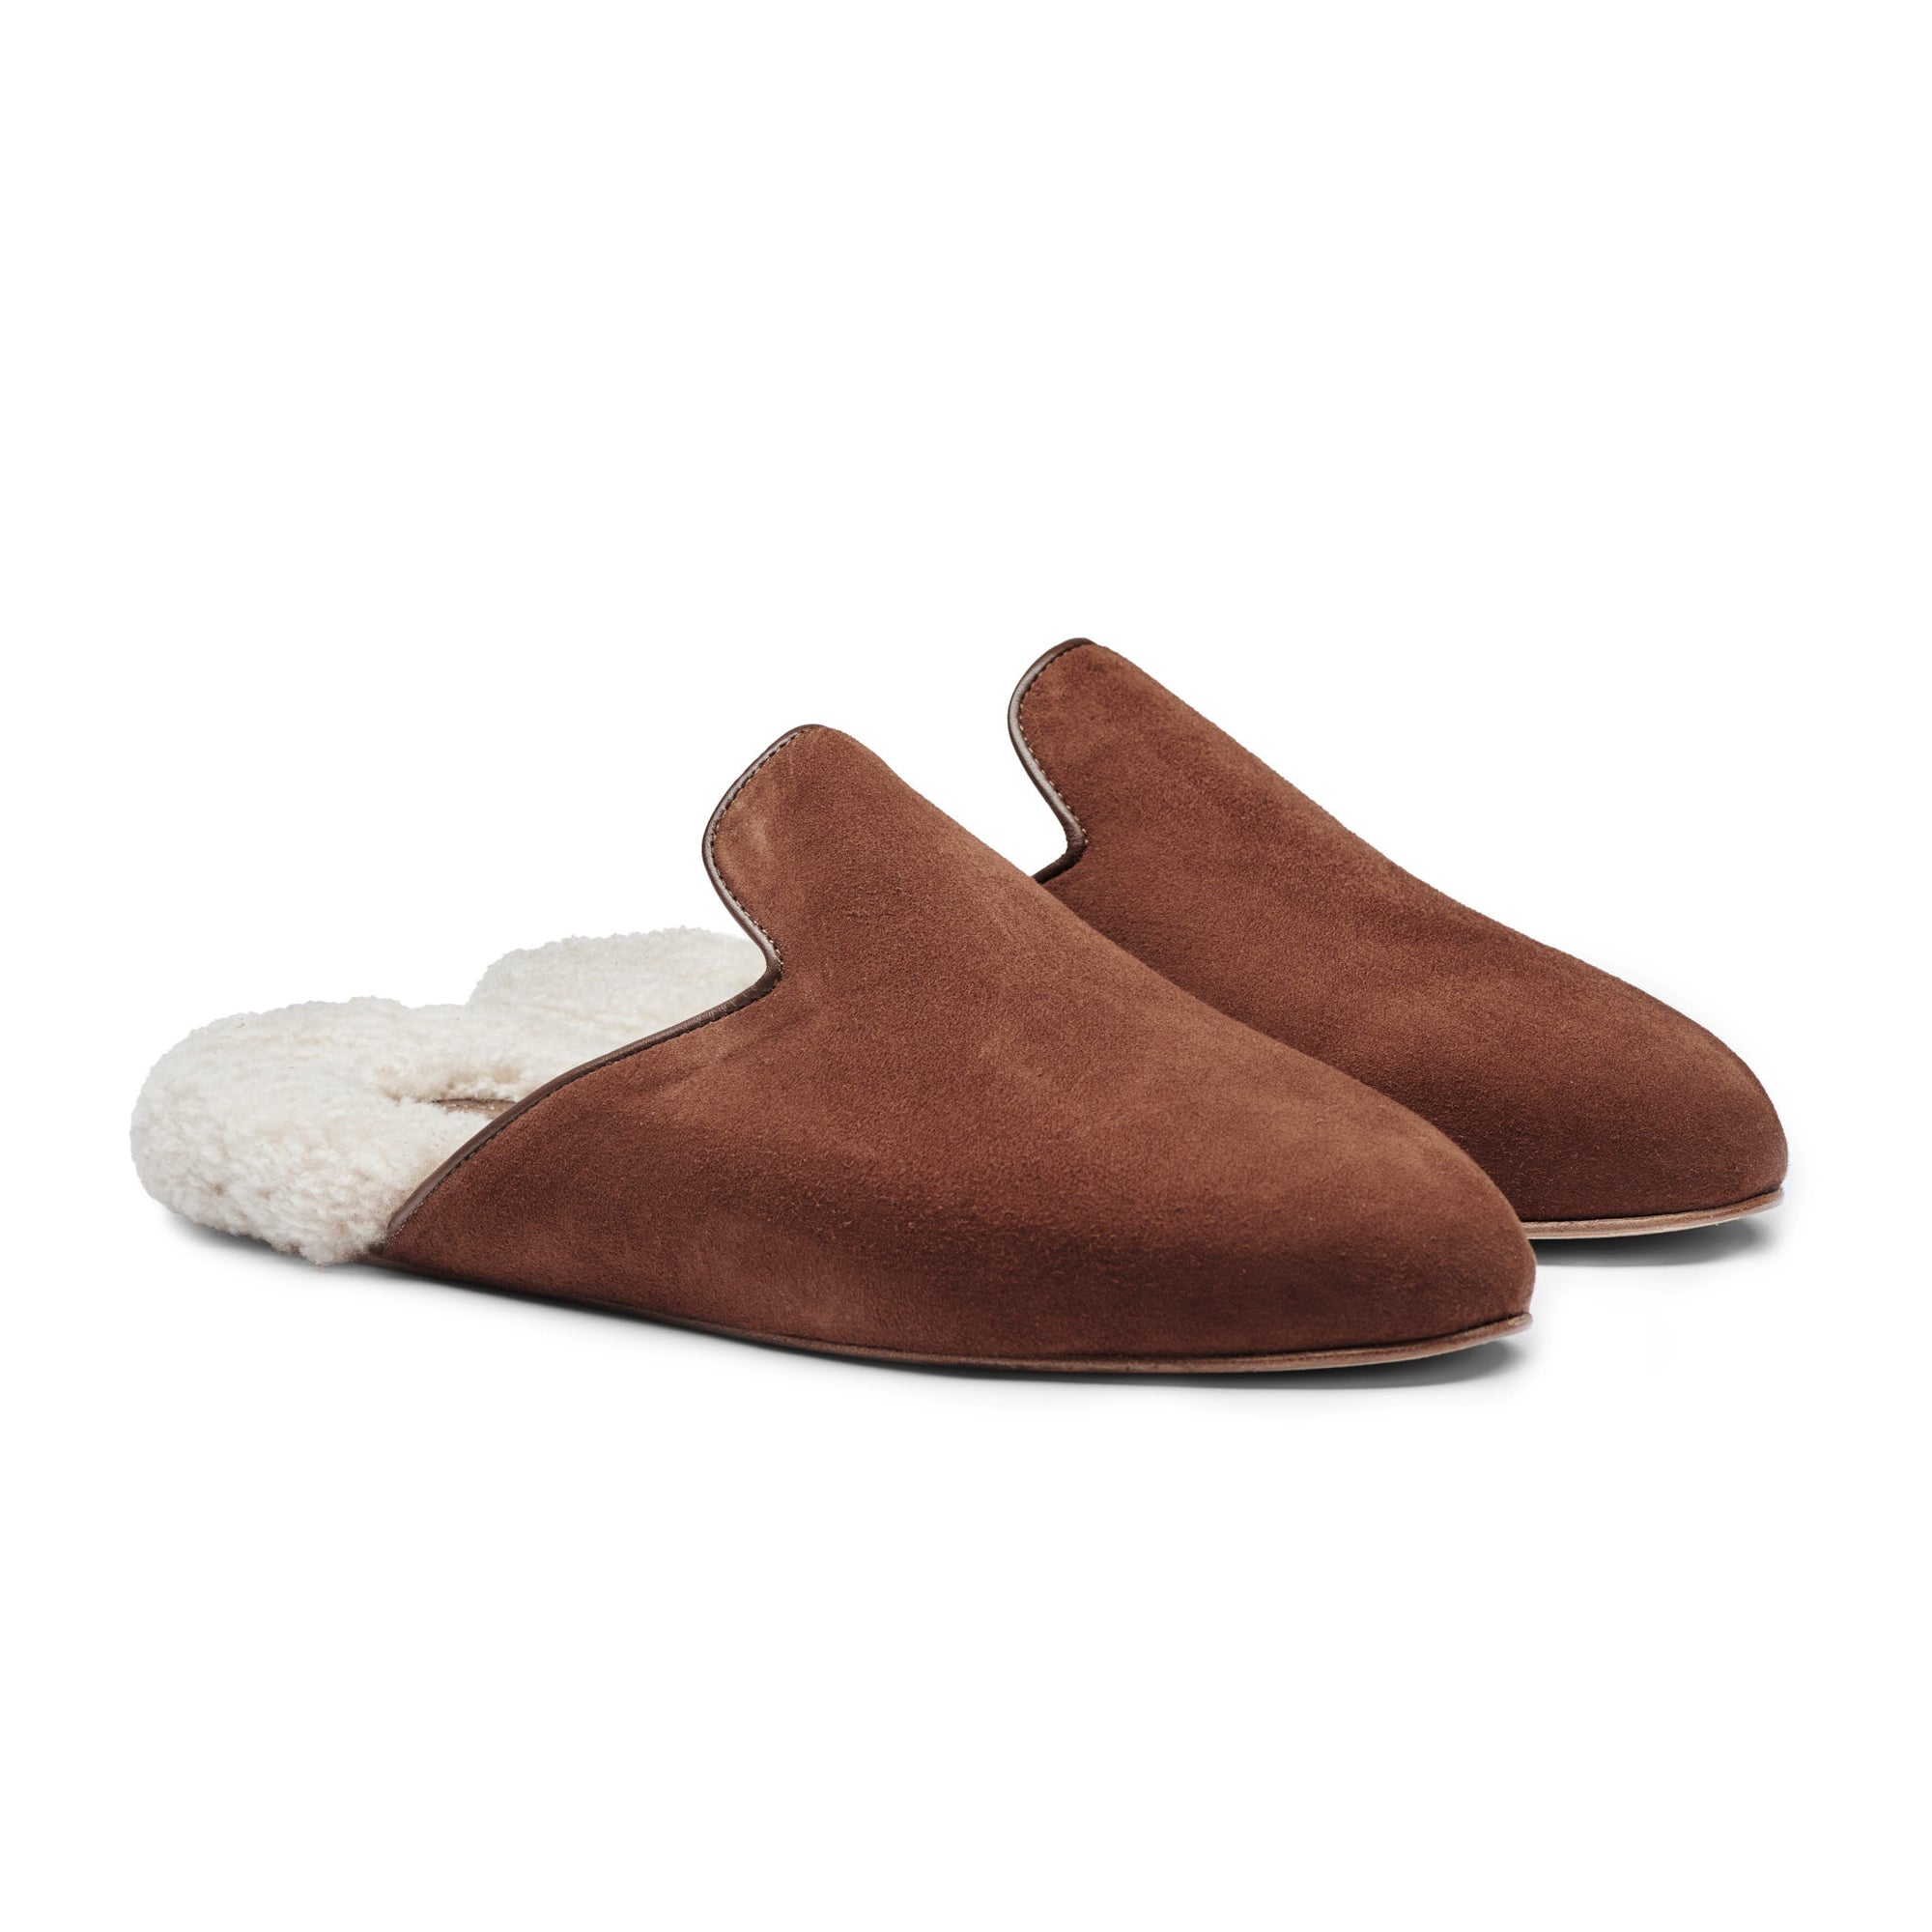 Inabo Men's Fritz Slipper in Tobacco suede and white shearling